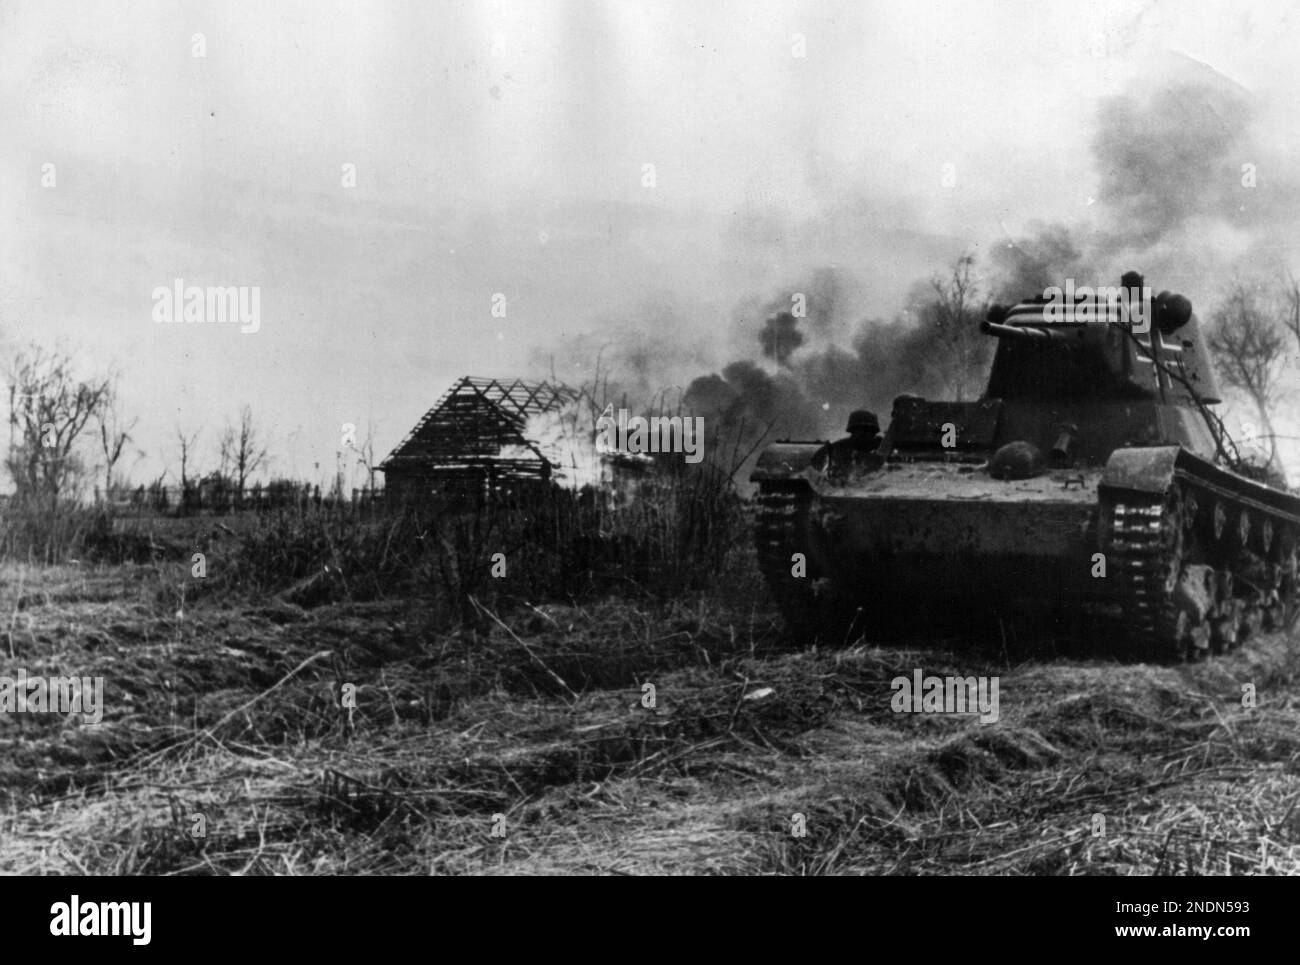 A captured Soviet T 26 C model tank of 1937 with German markings of the 3rd SS Panzer Division 'Totenkopf' drives through a burning village near Lake Ilmen. Stock Photo